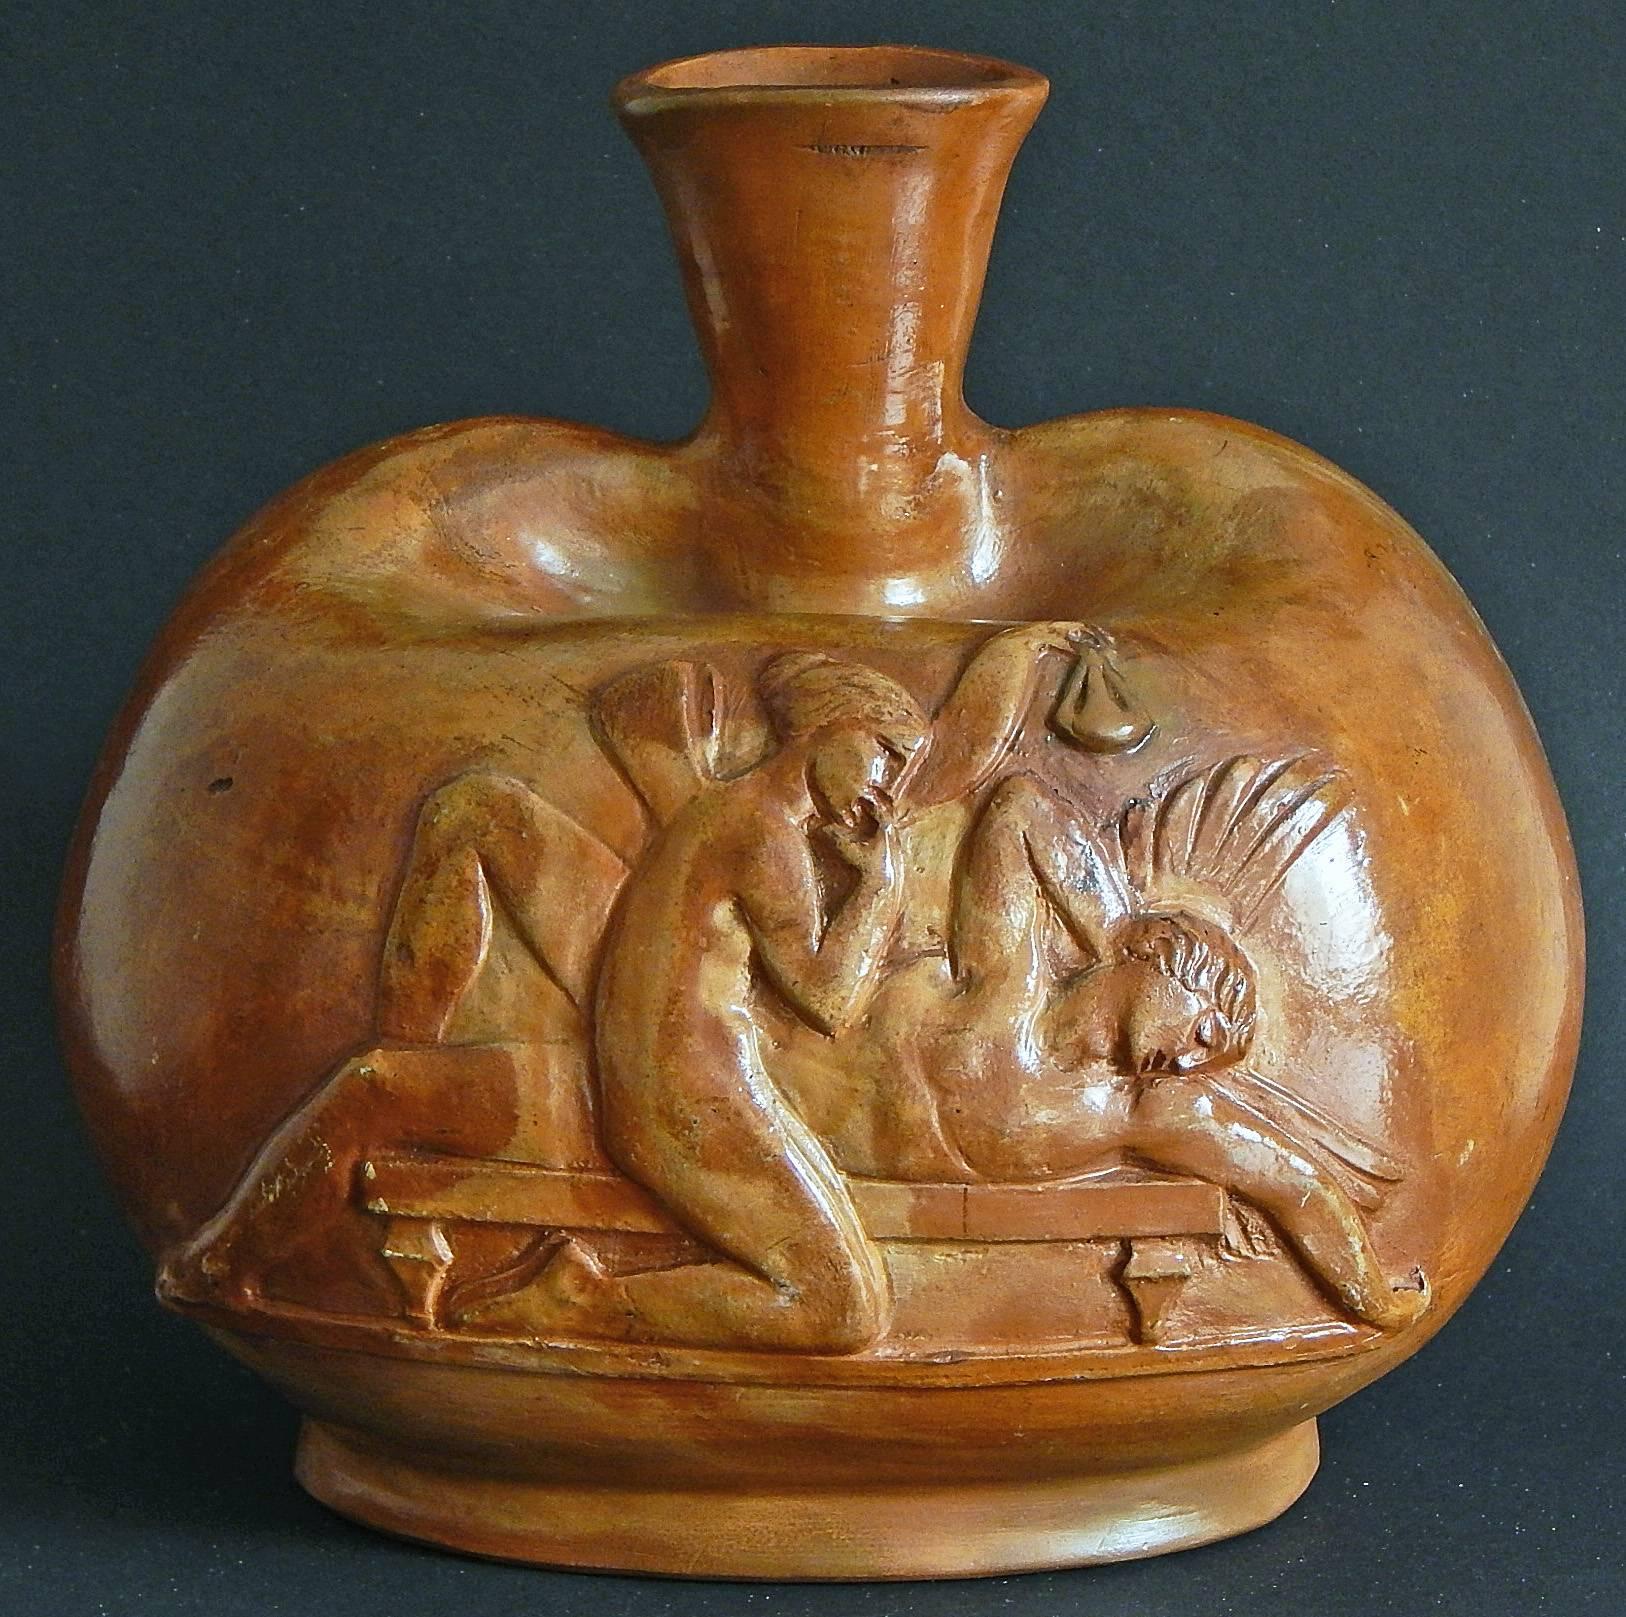 A fine and remarkable example of Art Deco sculpture, this vase is adorned on two sides with scenes from the mythological stories of Psyche and Cupid, carved into the clay not molded by Danish master Jens Jakob Bregnoe. The artist is best known for a